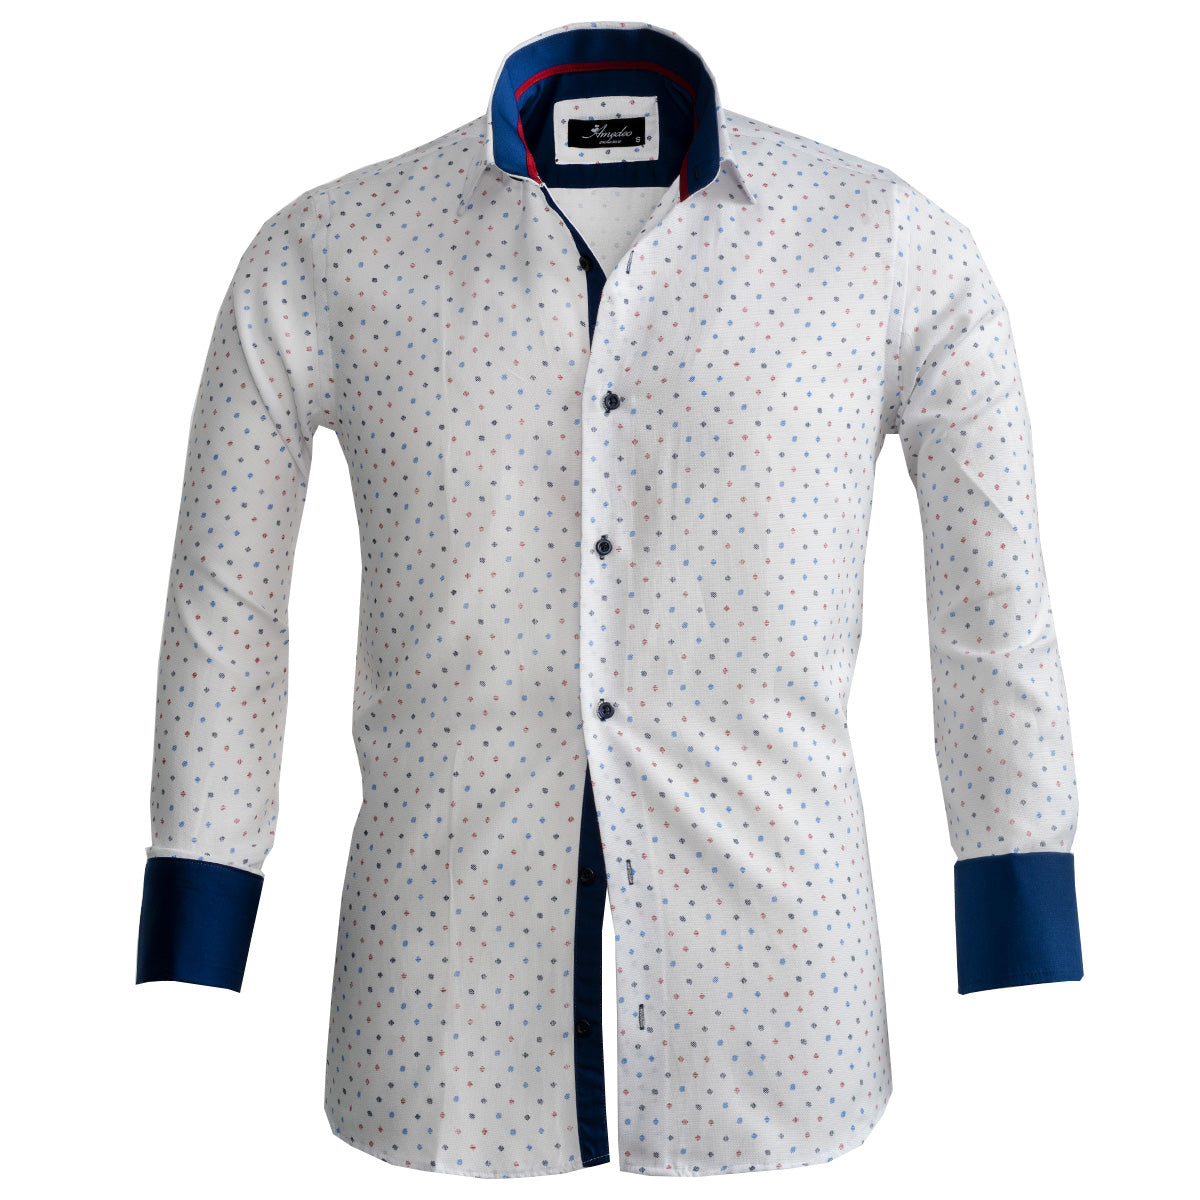 White and Blue Mens Slim Fit French Cuff Shirts with Cufflink Holes - Casual and Formal